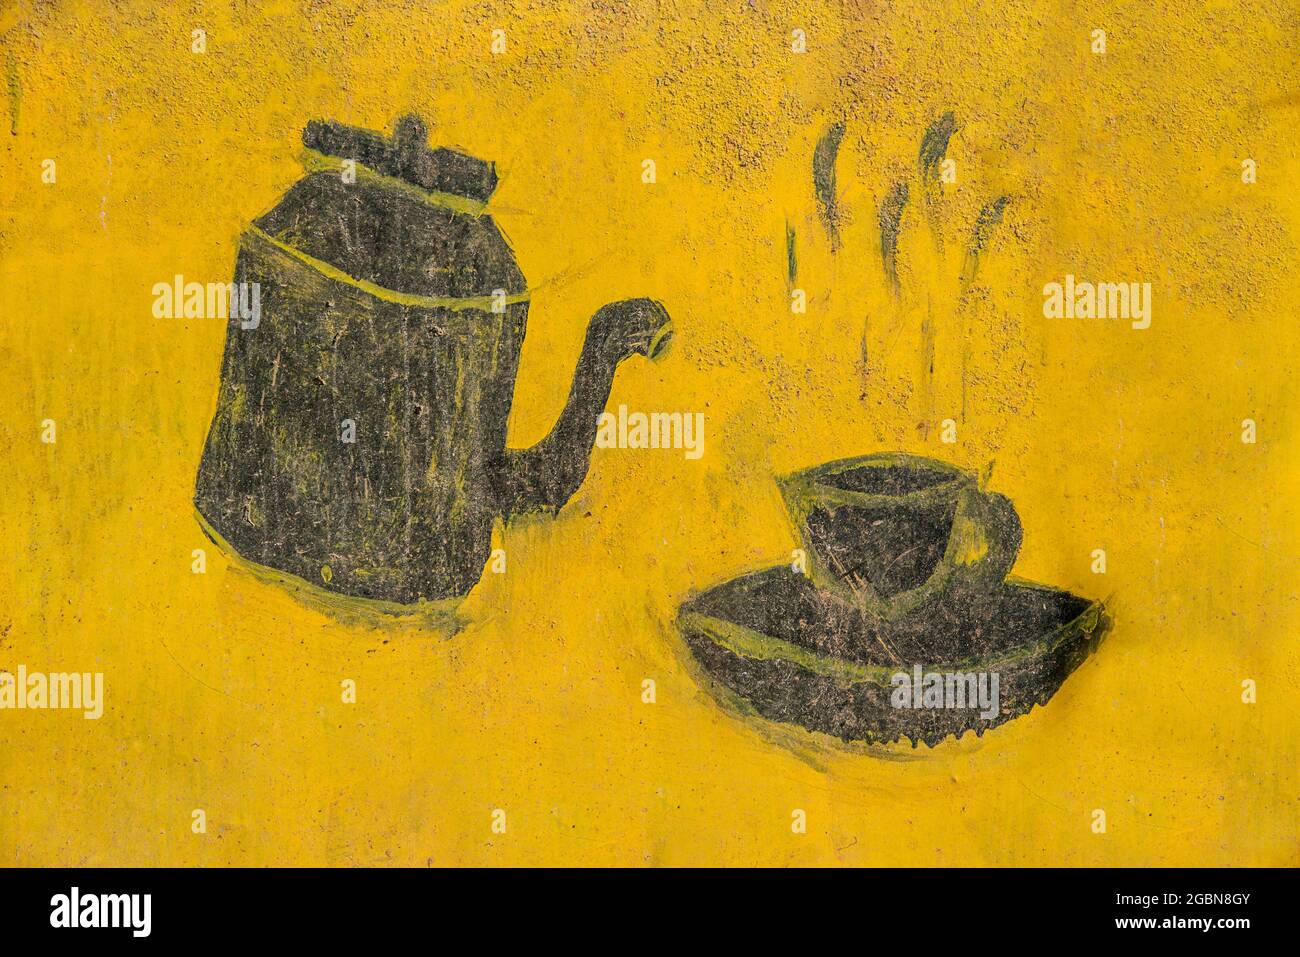 Beautiful tea set painting in the wall Stock Photo